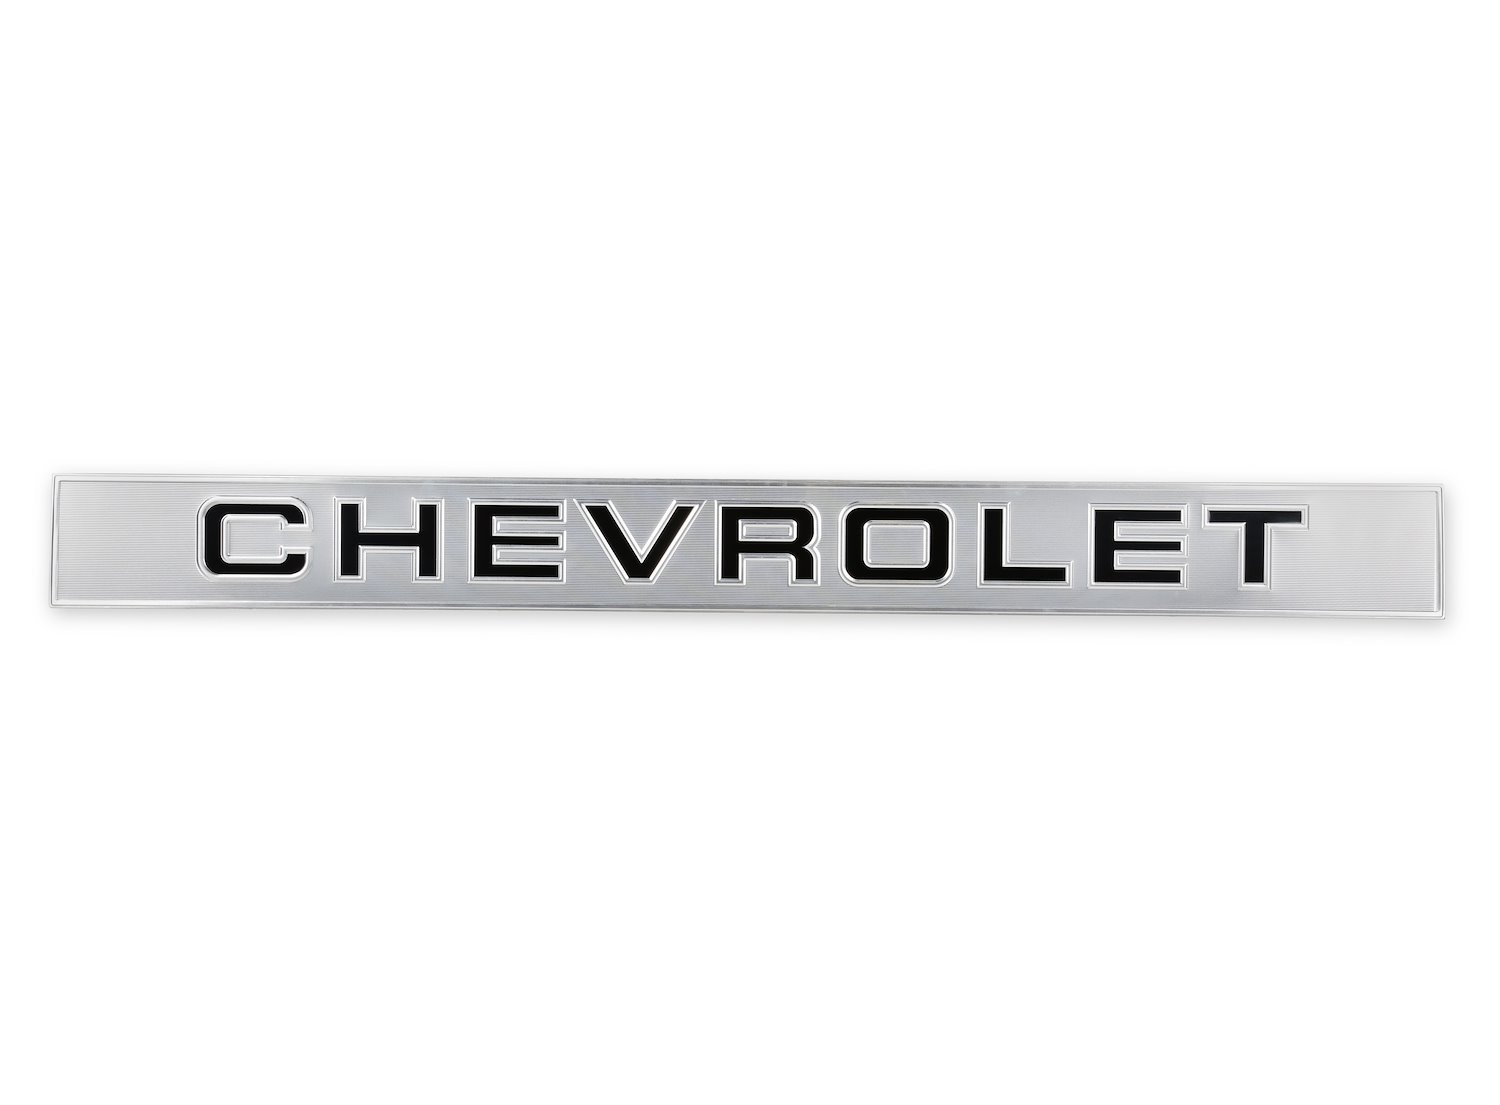 06-150 GMT400 Chevrolet Tailgate Emblem for 1988-2002 Chevy C/K Truck Series